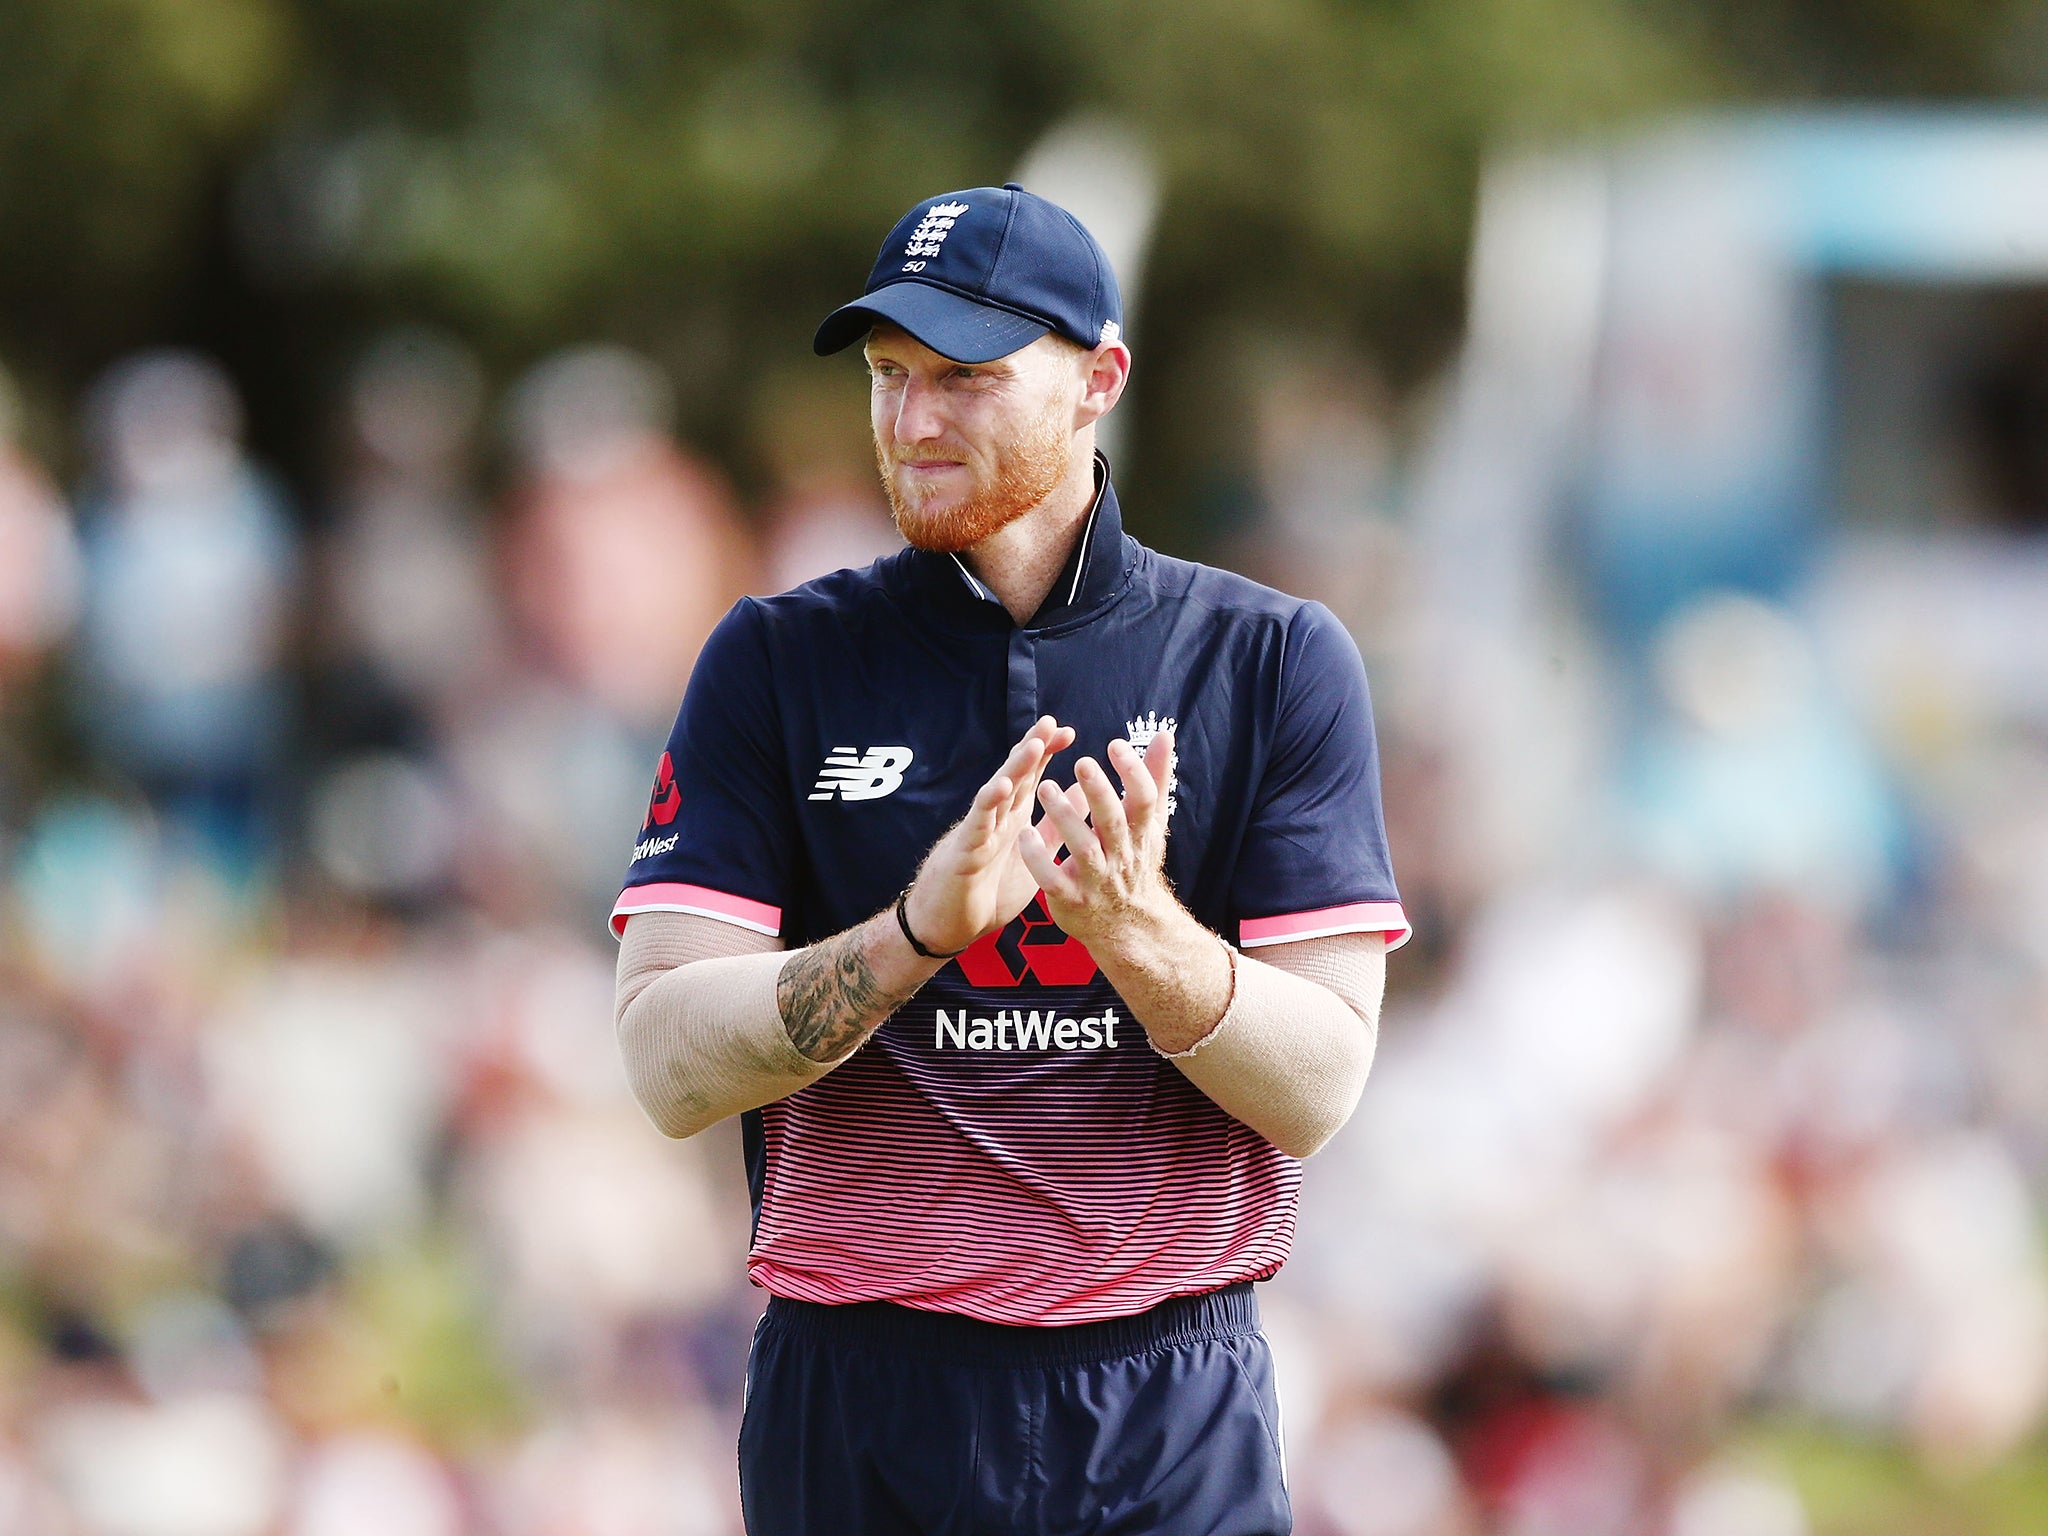 Stokes took two wickets before hitting an unbeaten 63